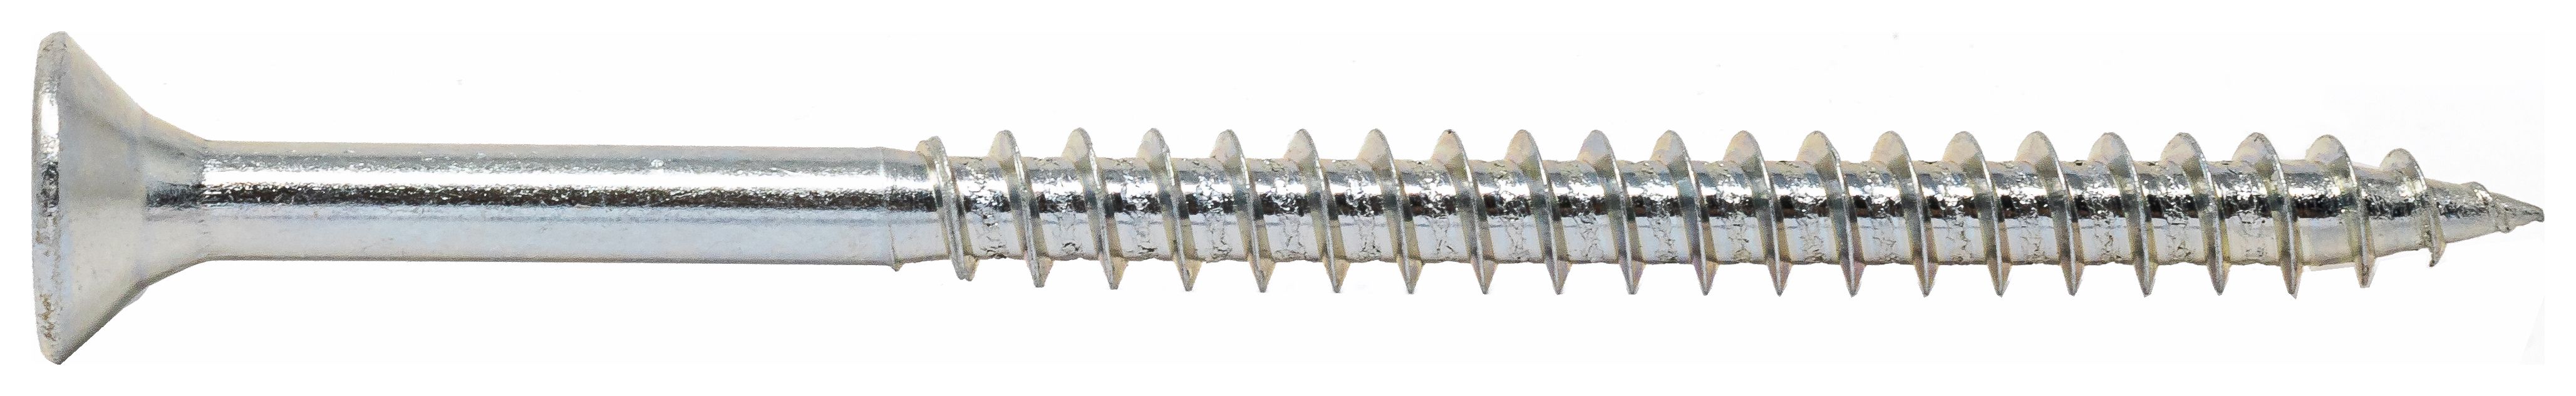 Image of Wickes Single Thread Zinc Plated Screw - 3.5 X 30mm Pack Of 200